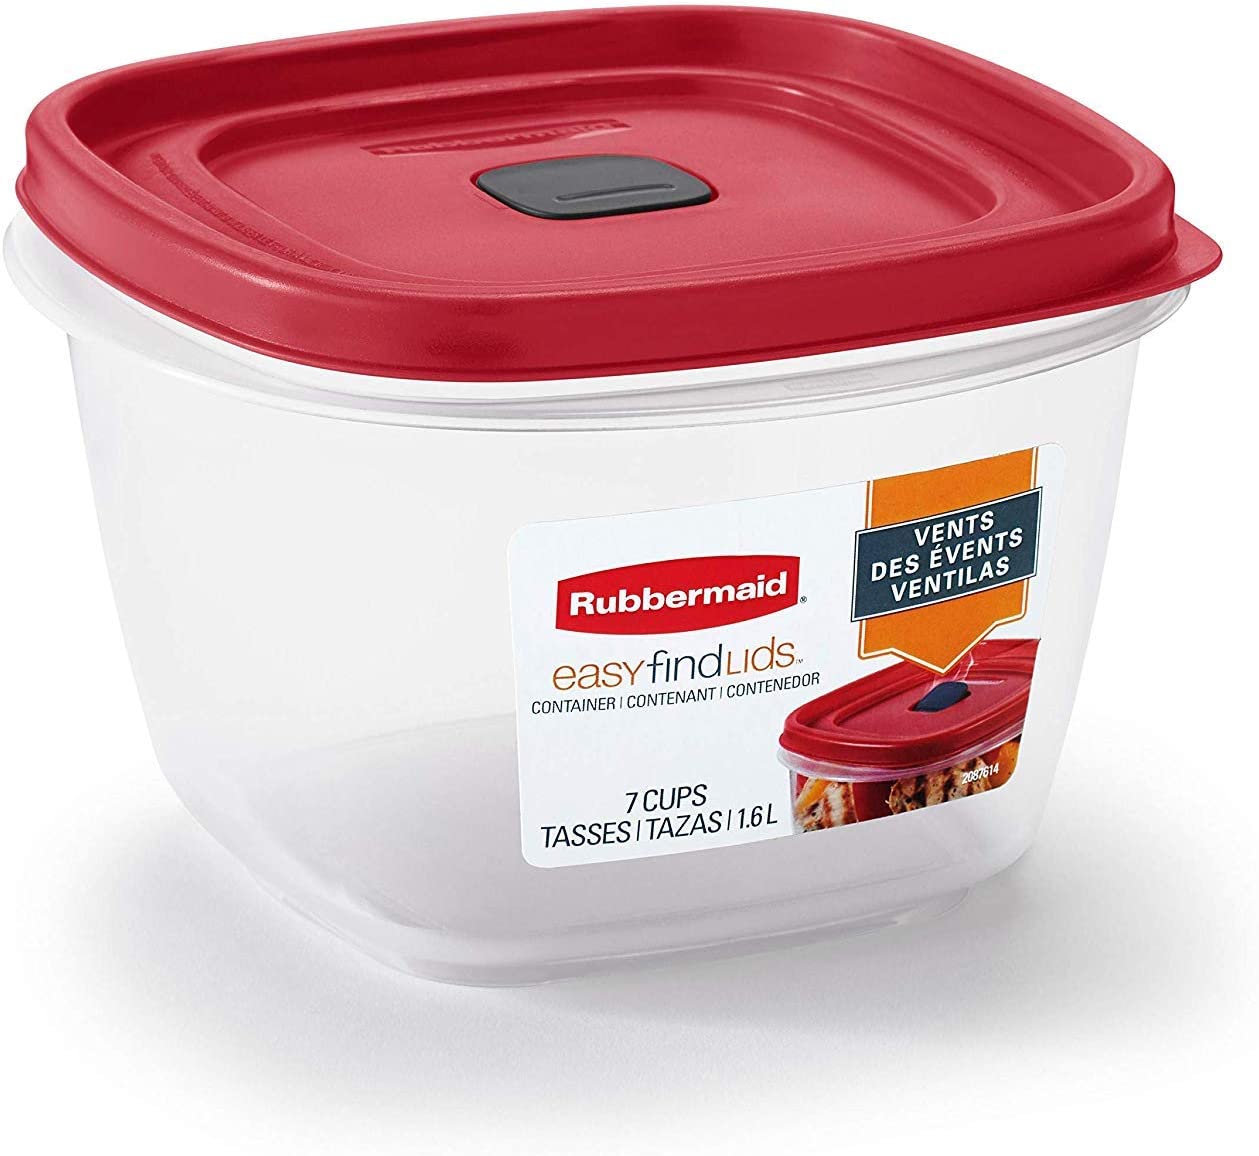 Rubbermaid Brilliance Food Storage Container - 1991158 for sale